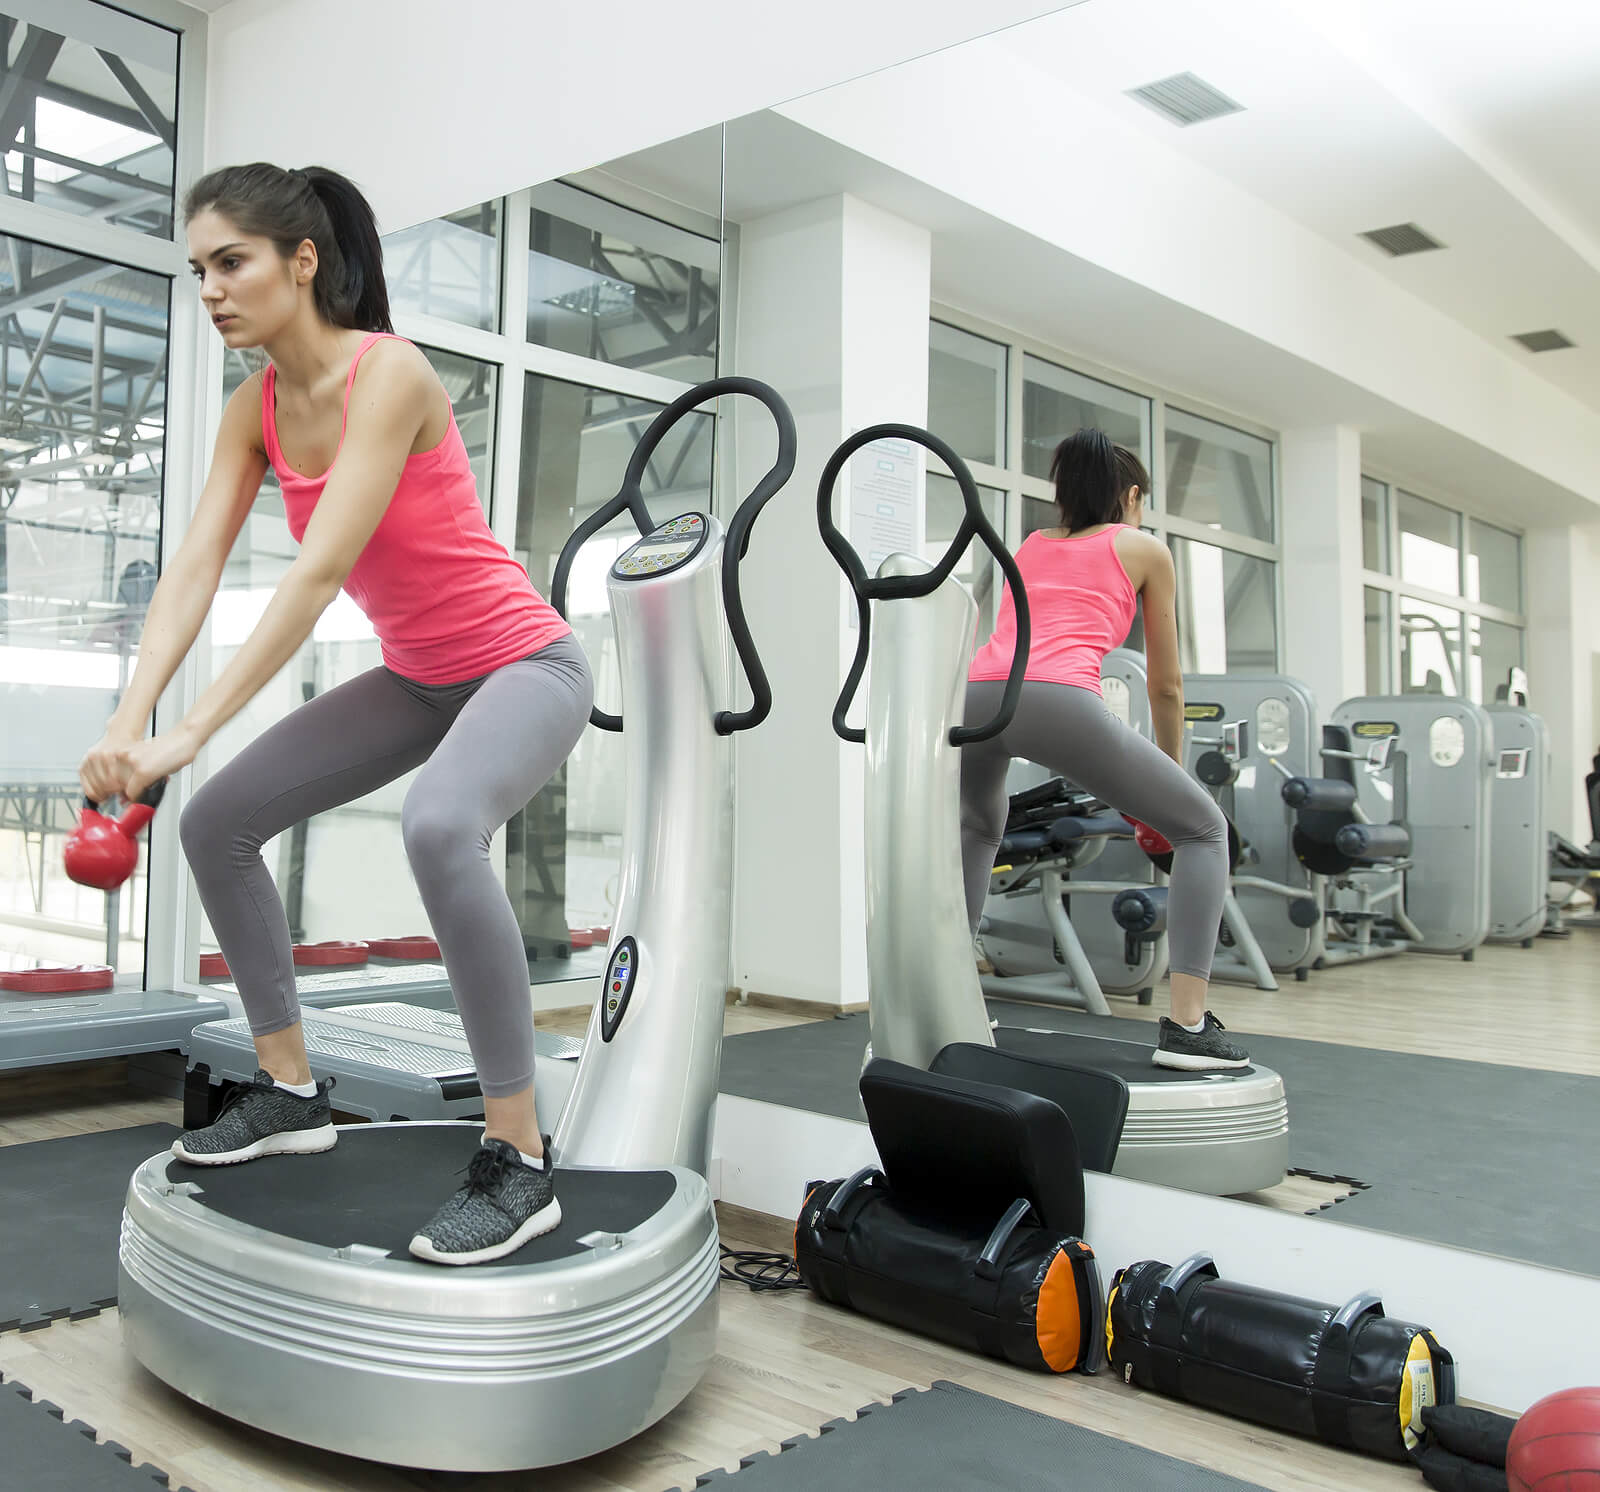 Do Vibration Plates Really Help Your Abs?